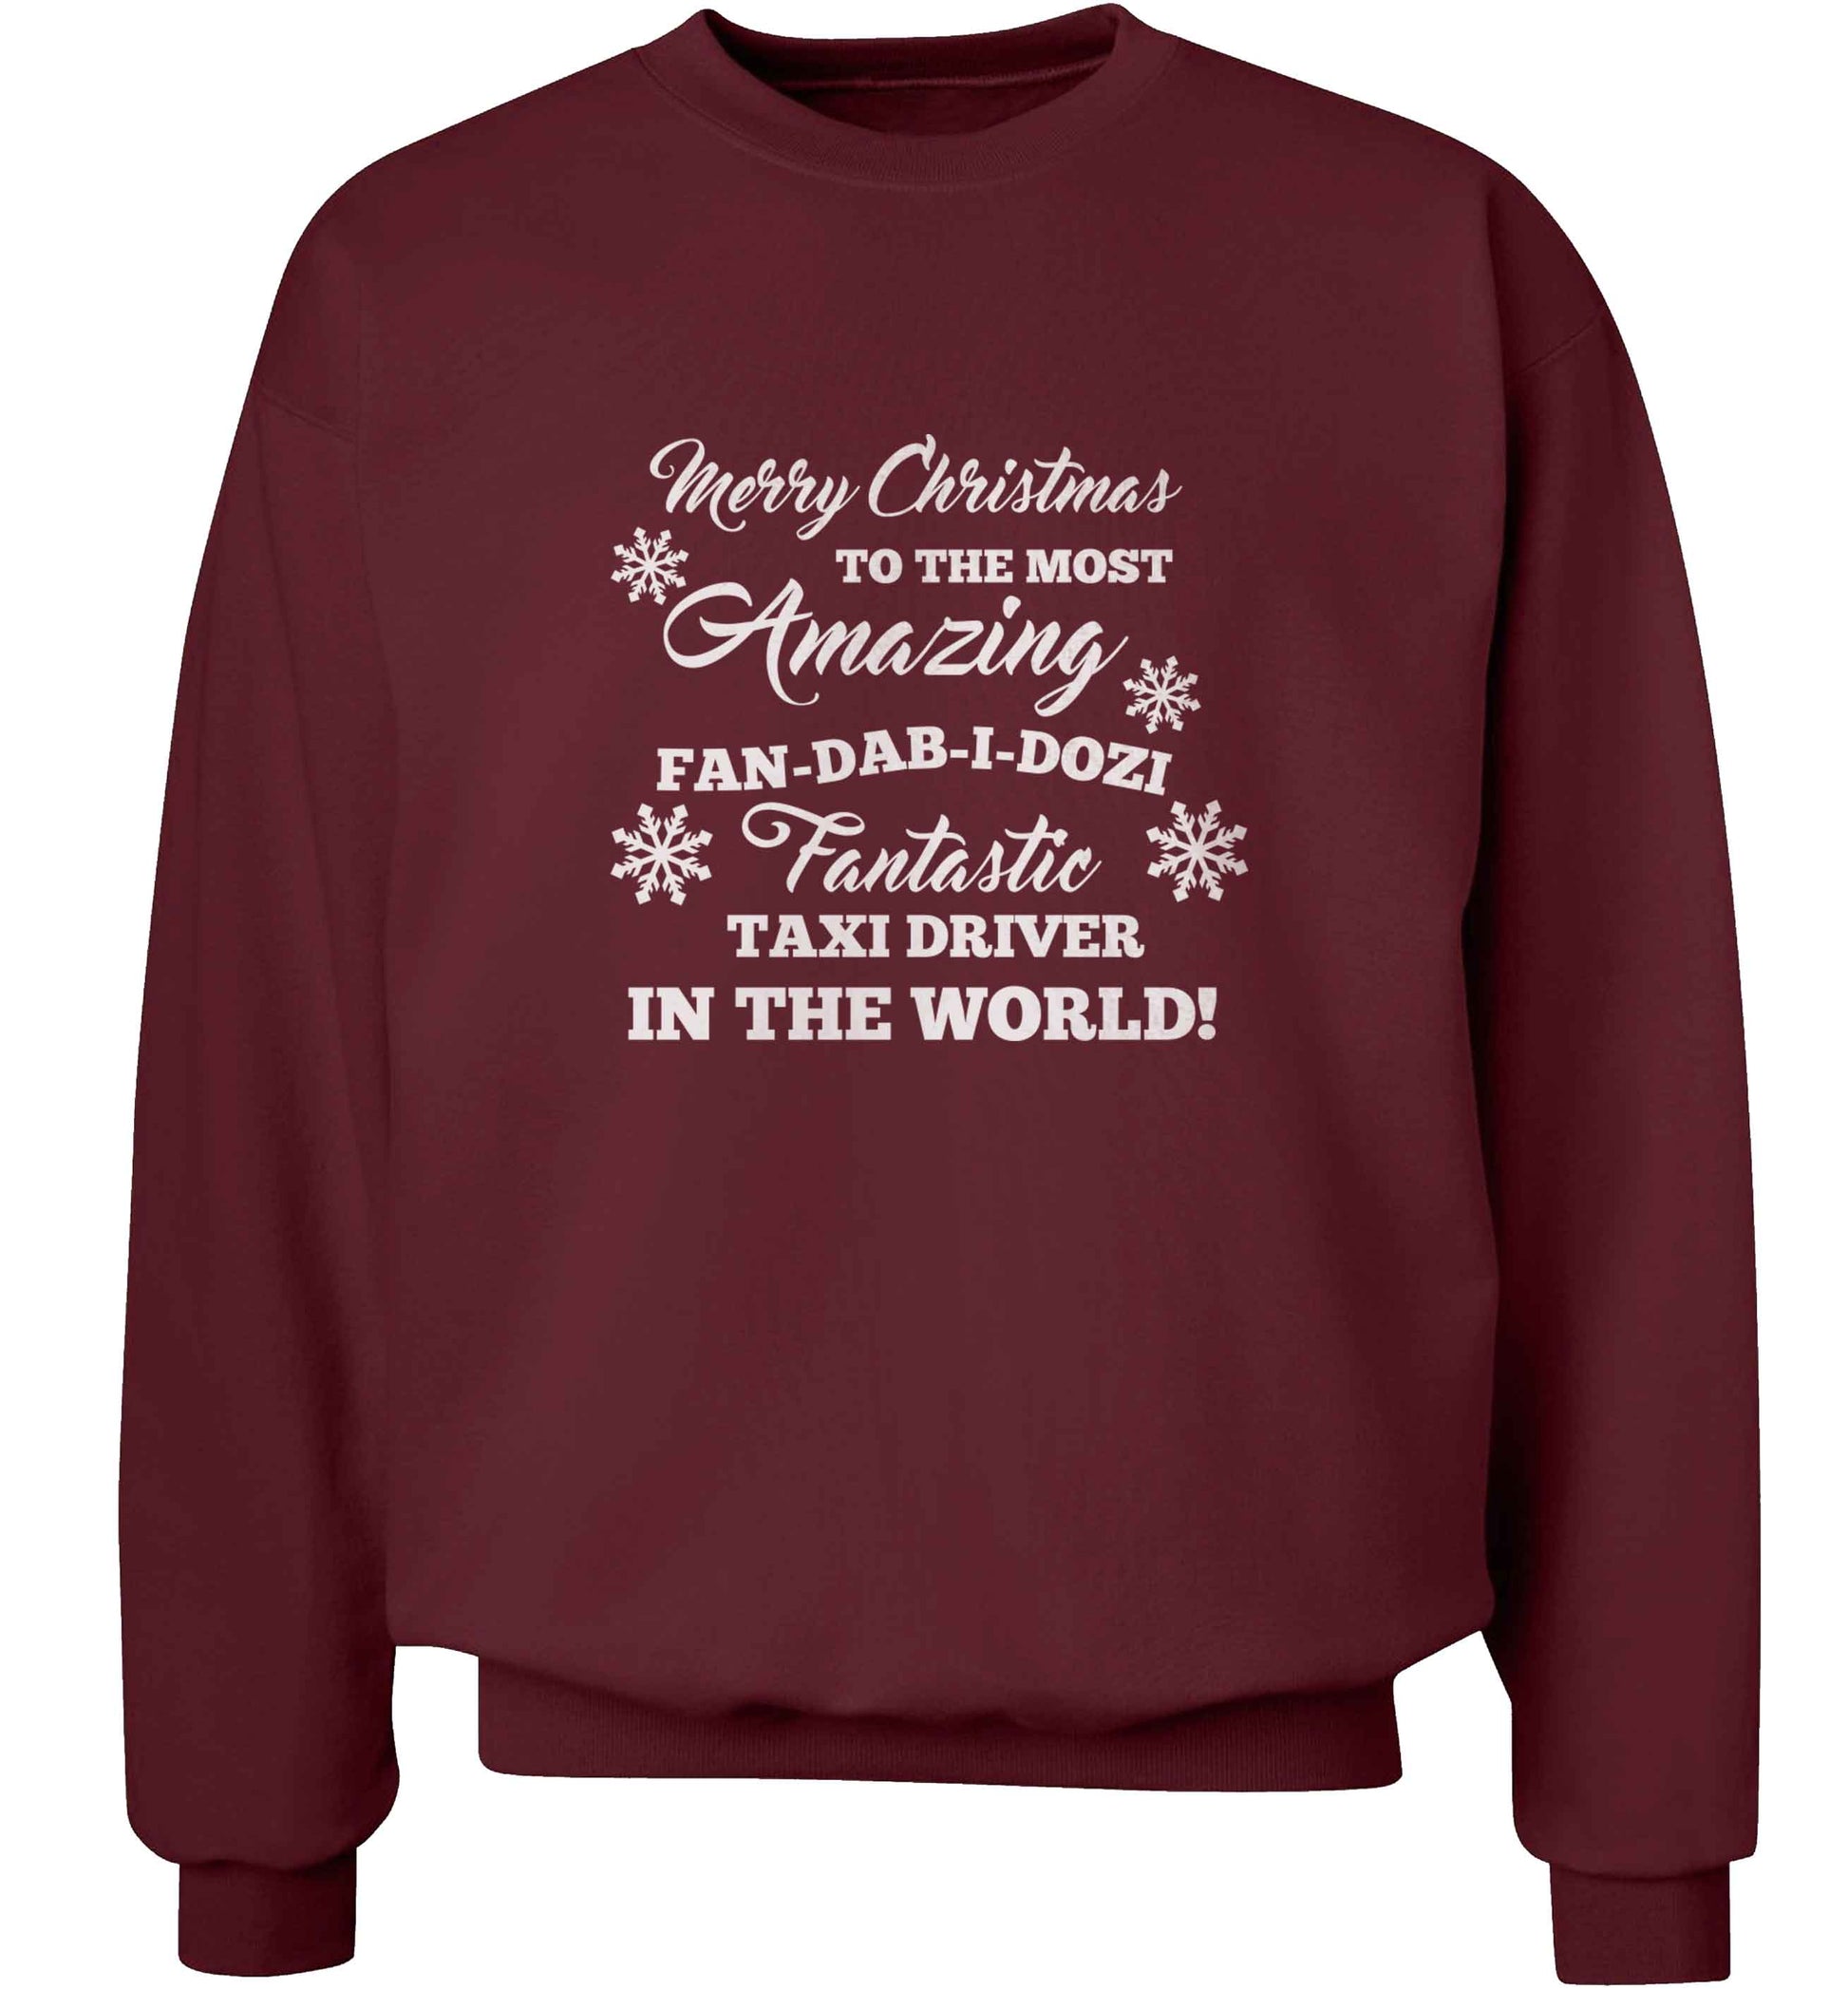 Merry Christmas to the most amazing taxi driver in the world! adult's unisex maroon sweater 2XL